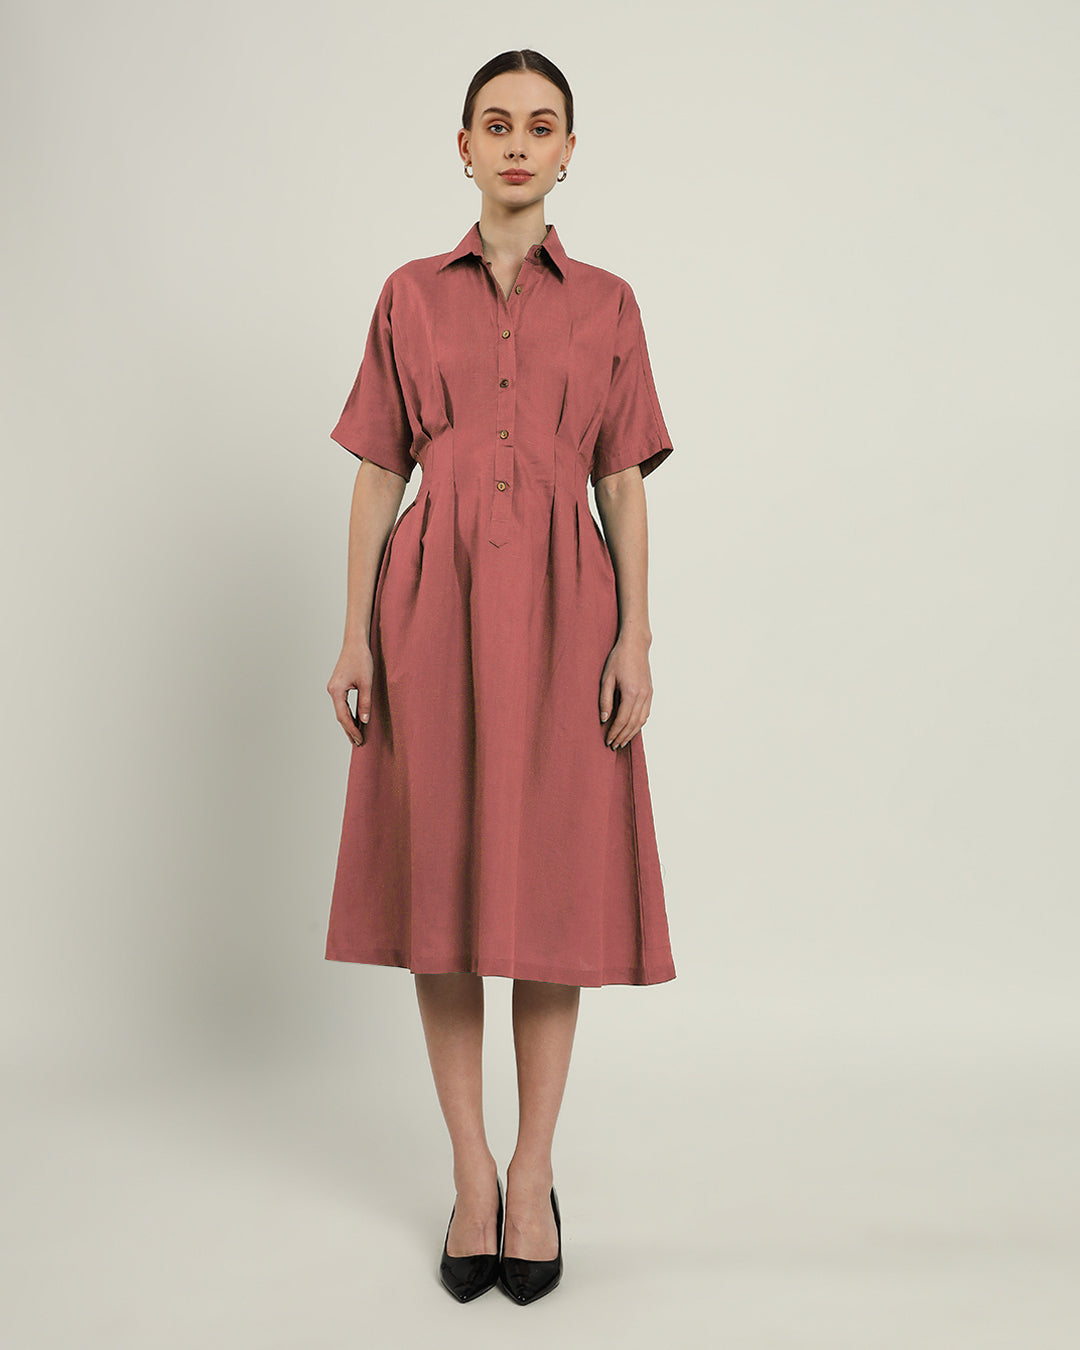 The Salford Ivory Pink Cotton Dress